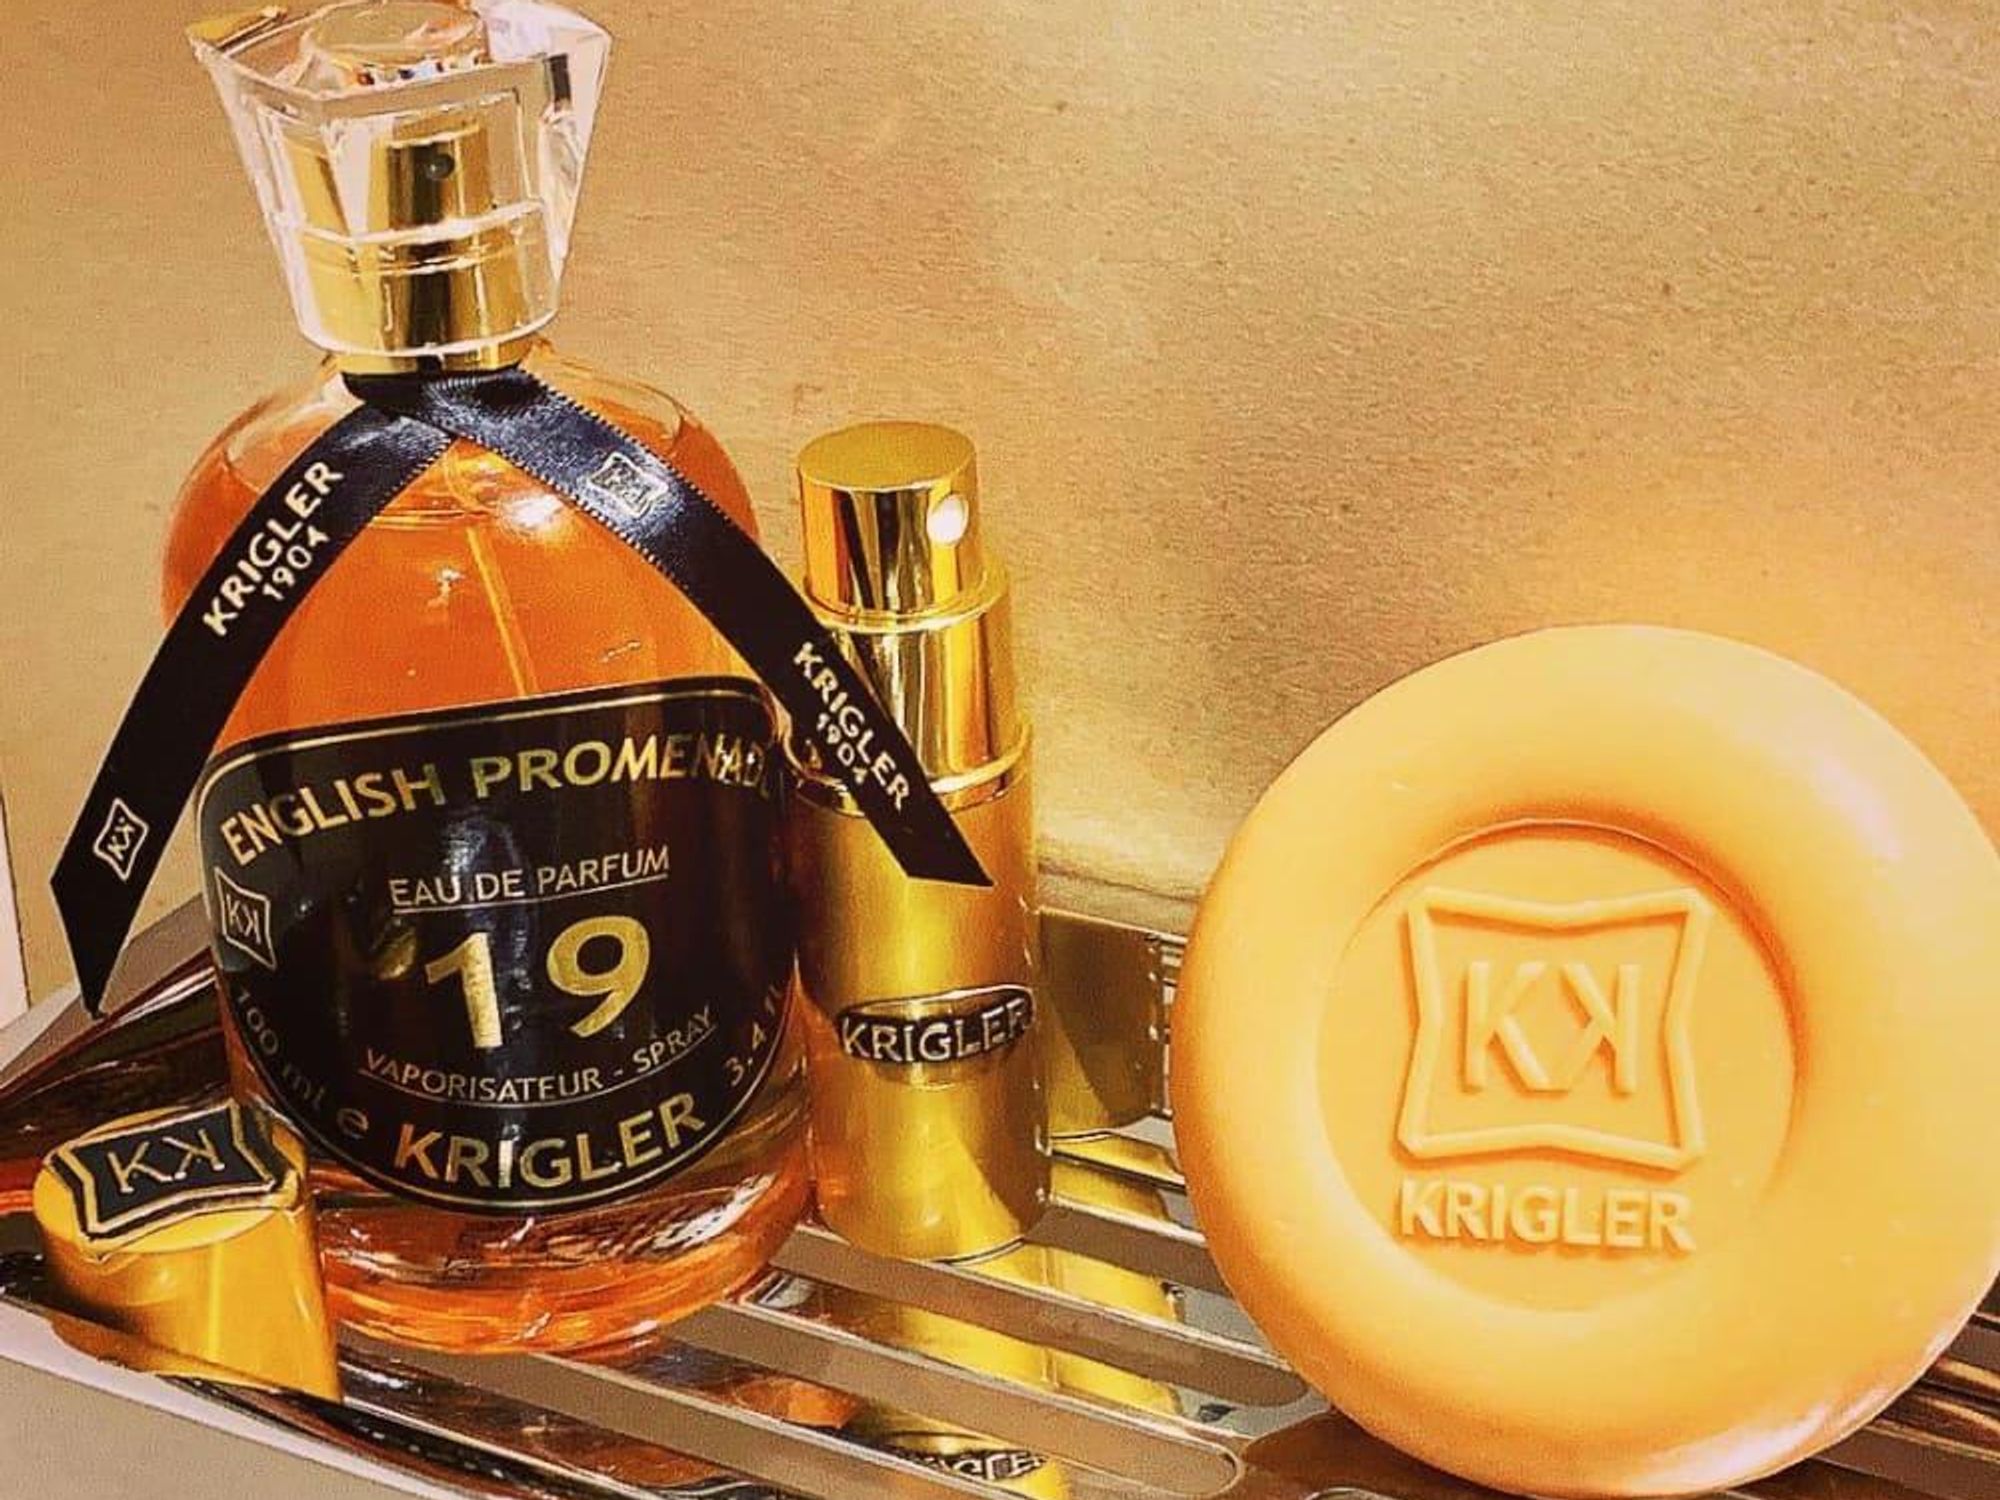 In the wild world of ultra-luxury perfumes